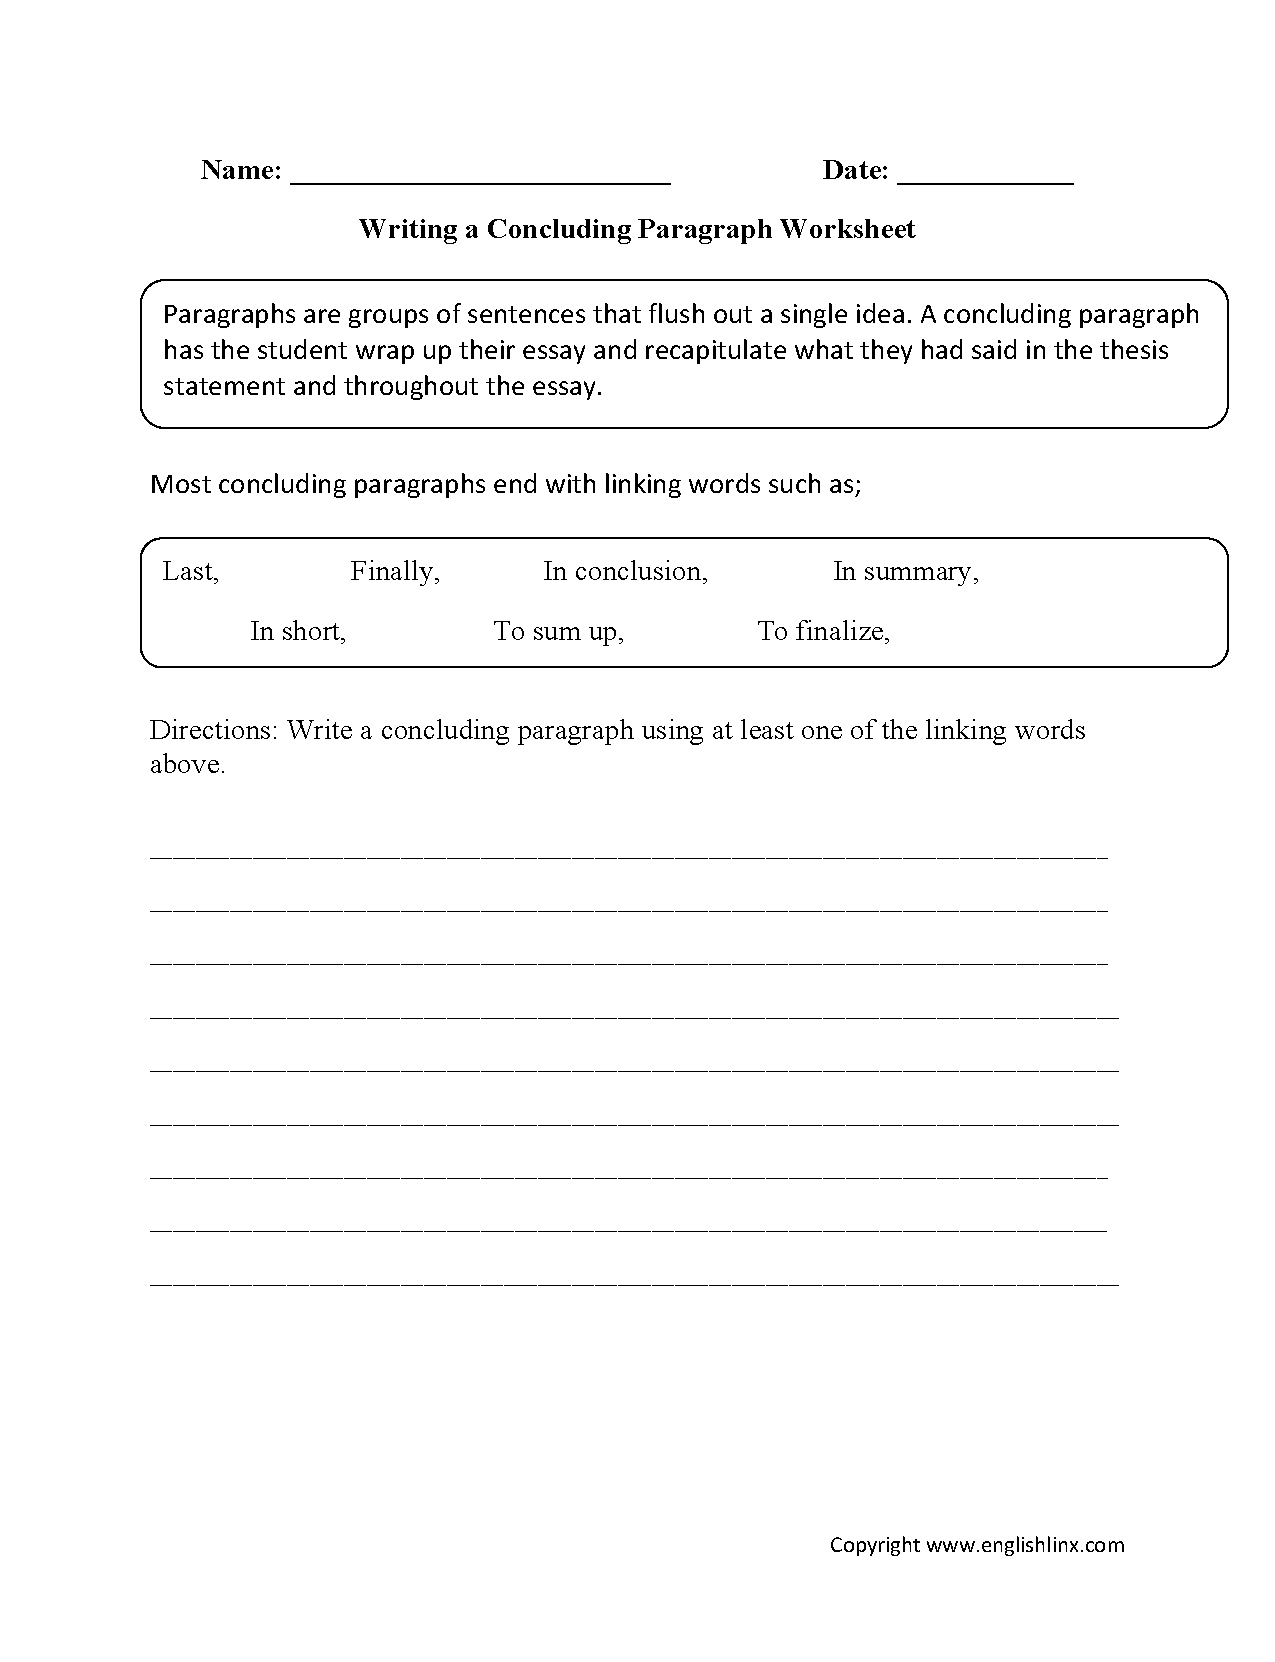 Fix The Paragraph Worksheet